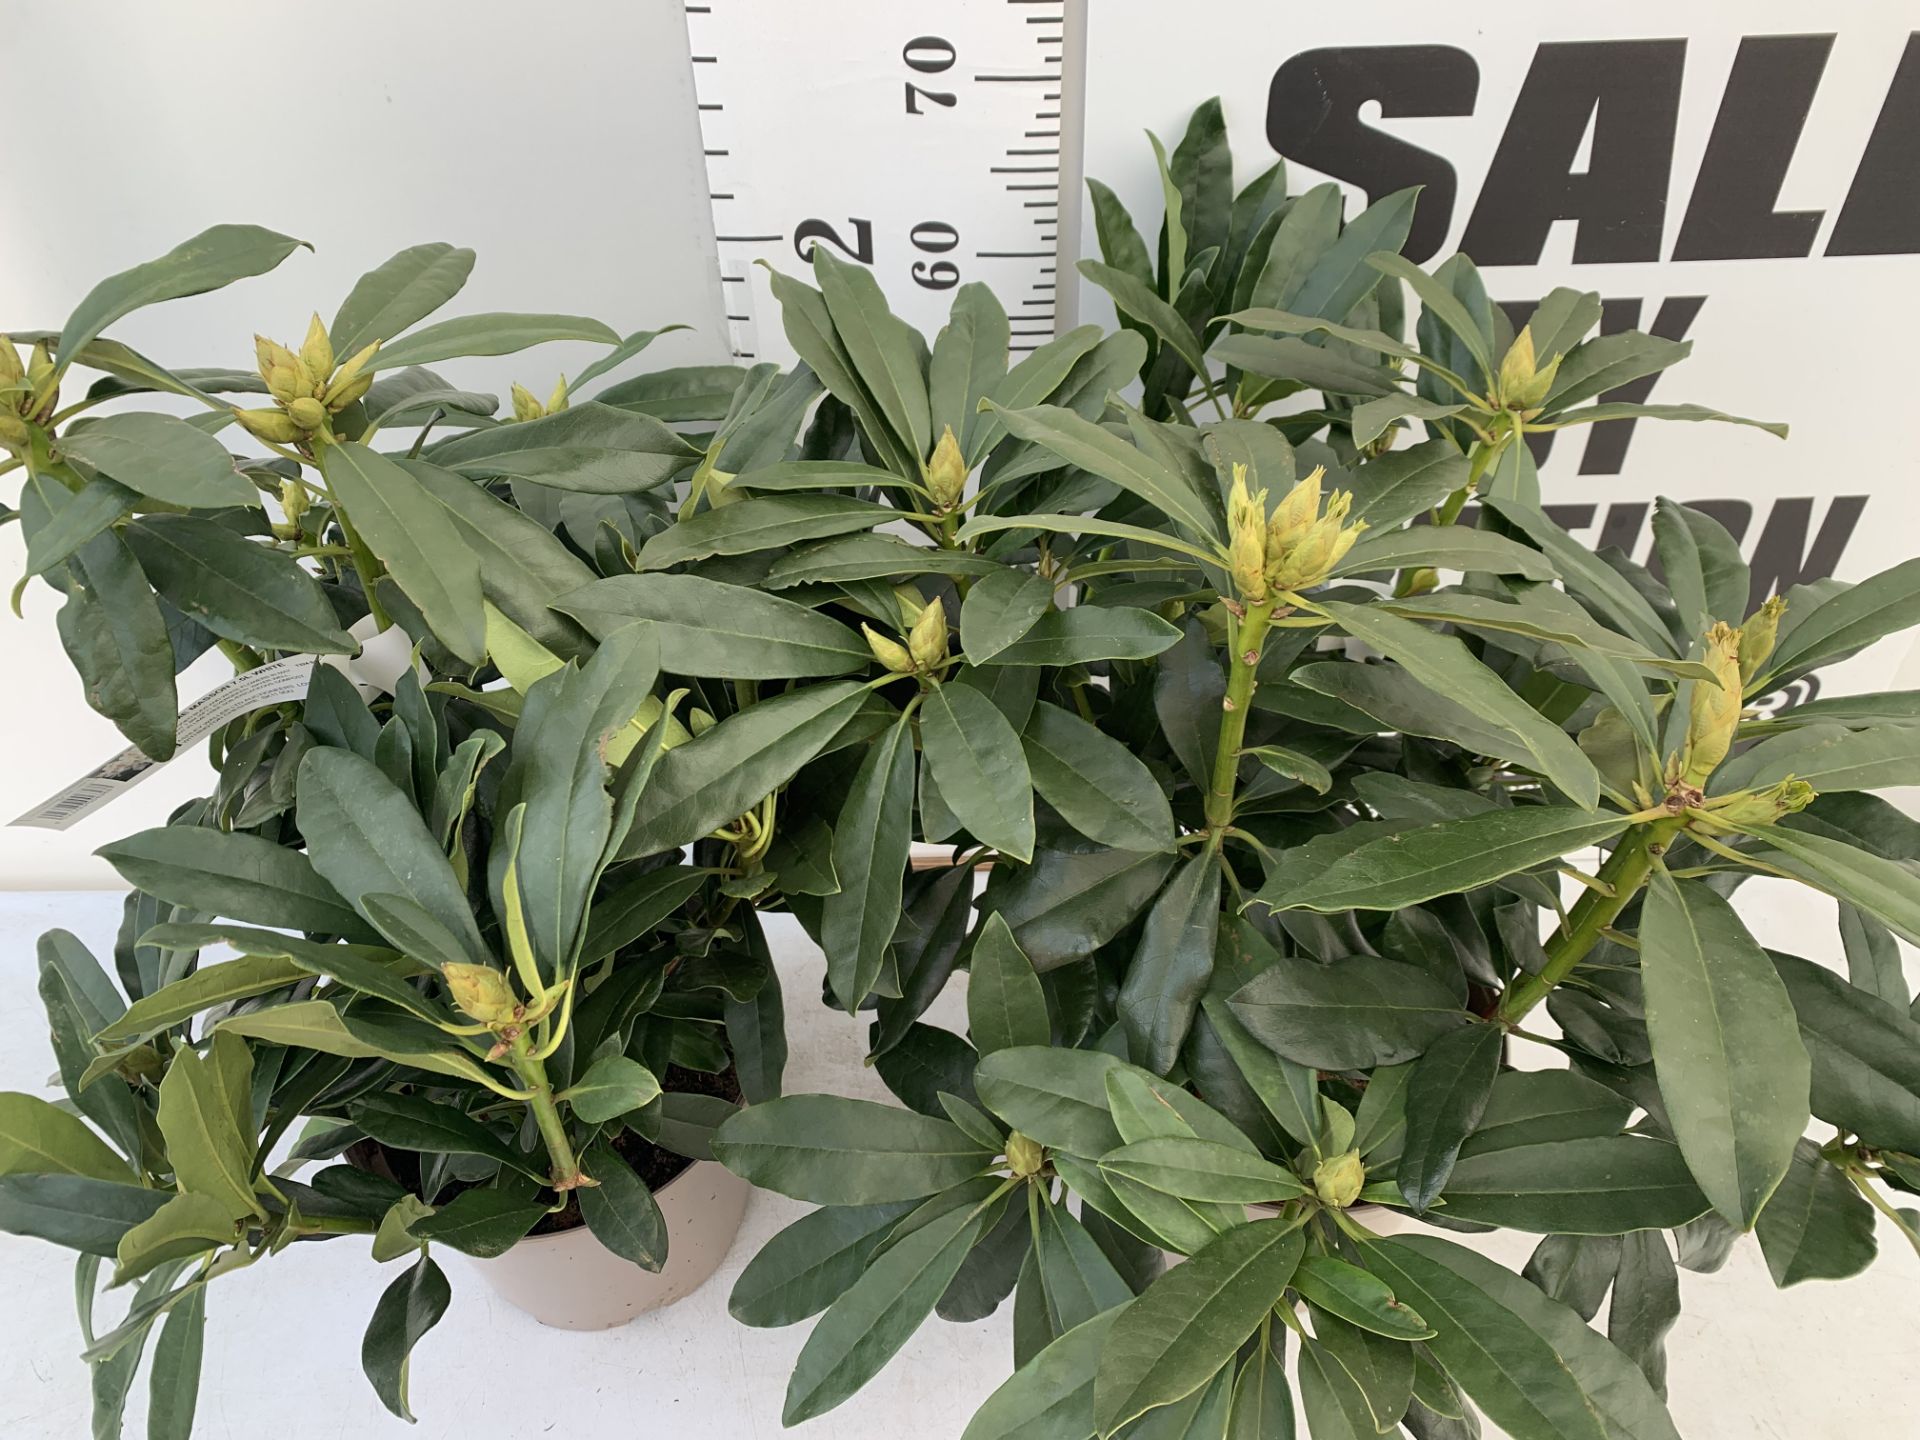 TWO RHODODENDRONS MADAME MASSON WHITE IN 7.5 LTR POTS APPROX 70CM IN HEIGHT PLUS VAT TO BE SOLD - Image 3 of 6